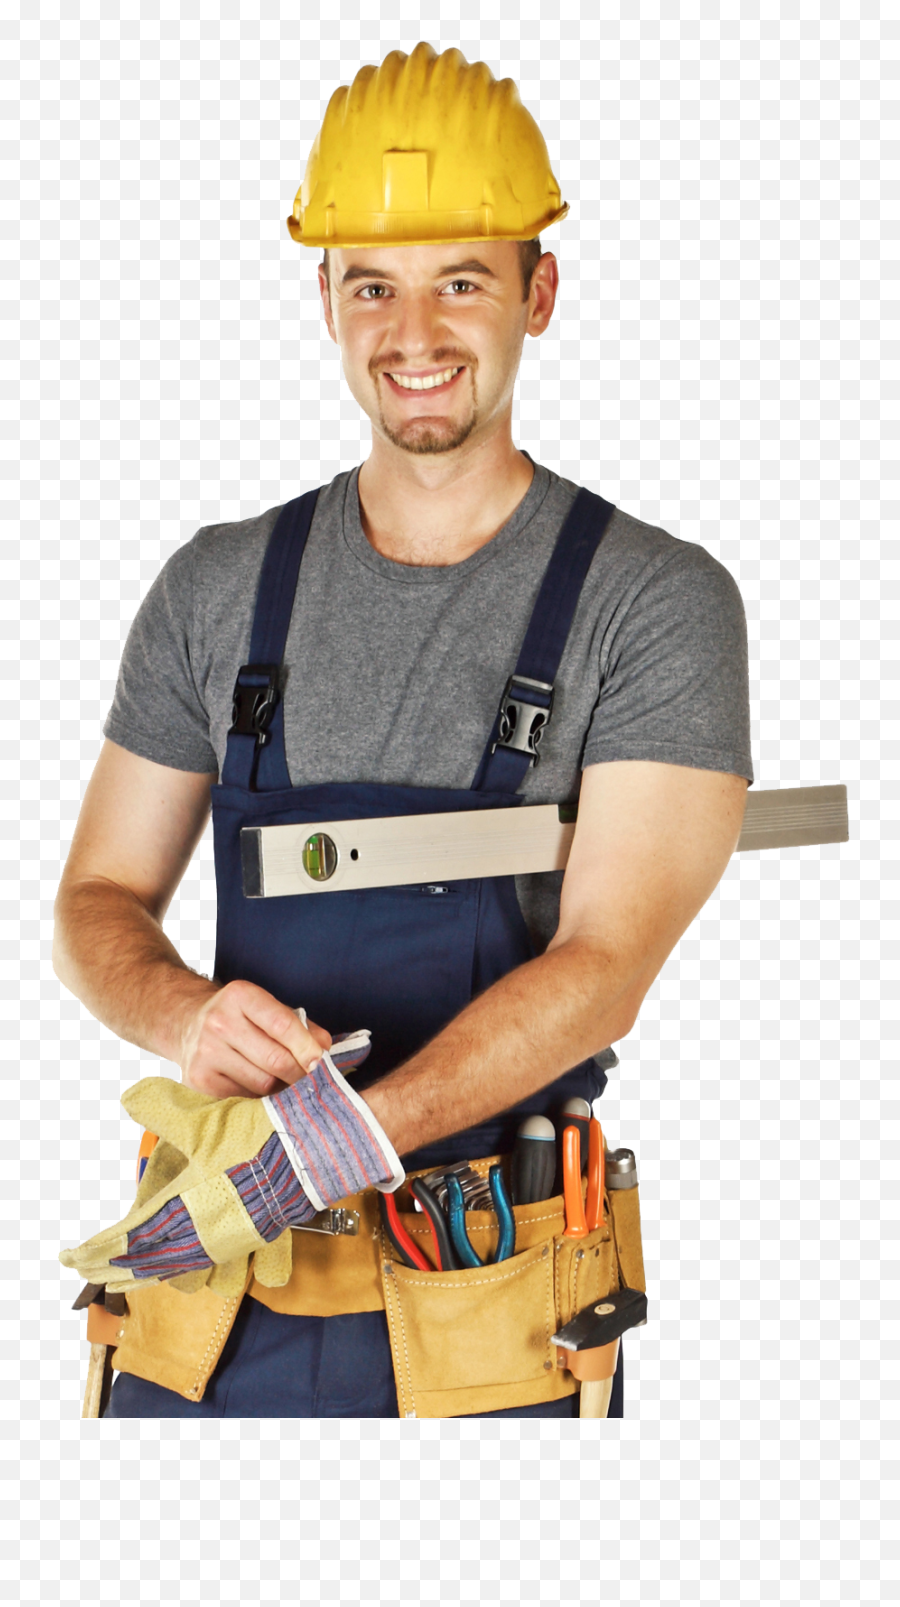 Png Images Pngs Engineer Industrial - Construction Man With Tools Emoji,Construction Worker Scenes And Emotions